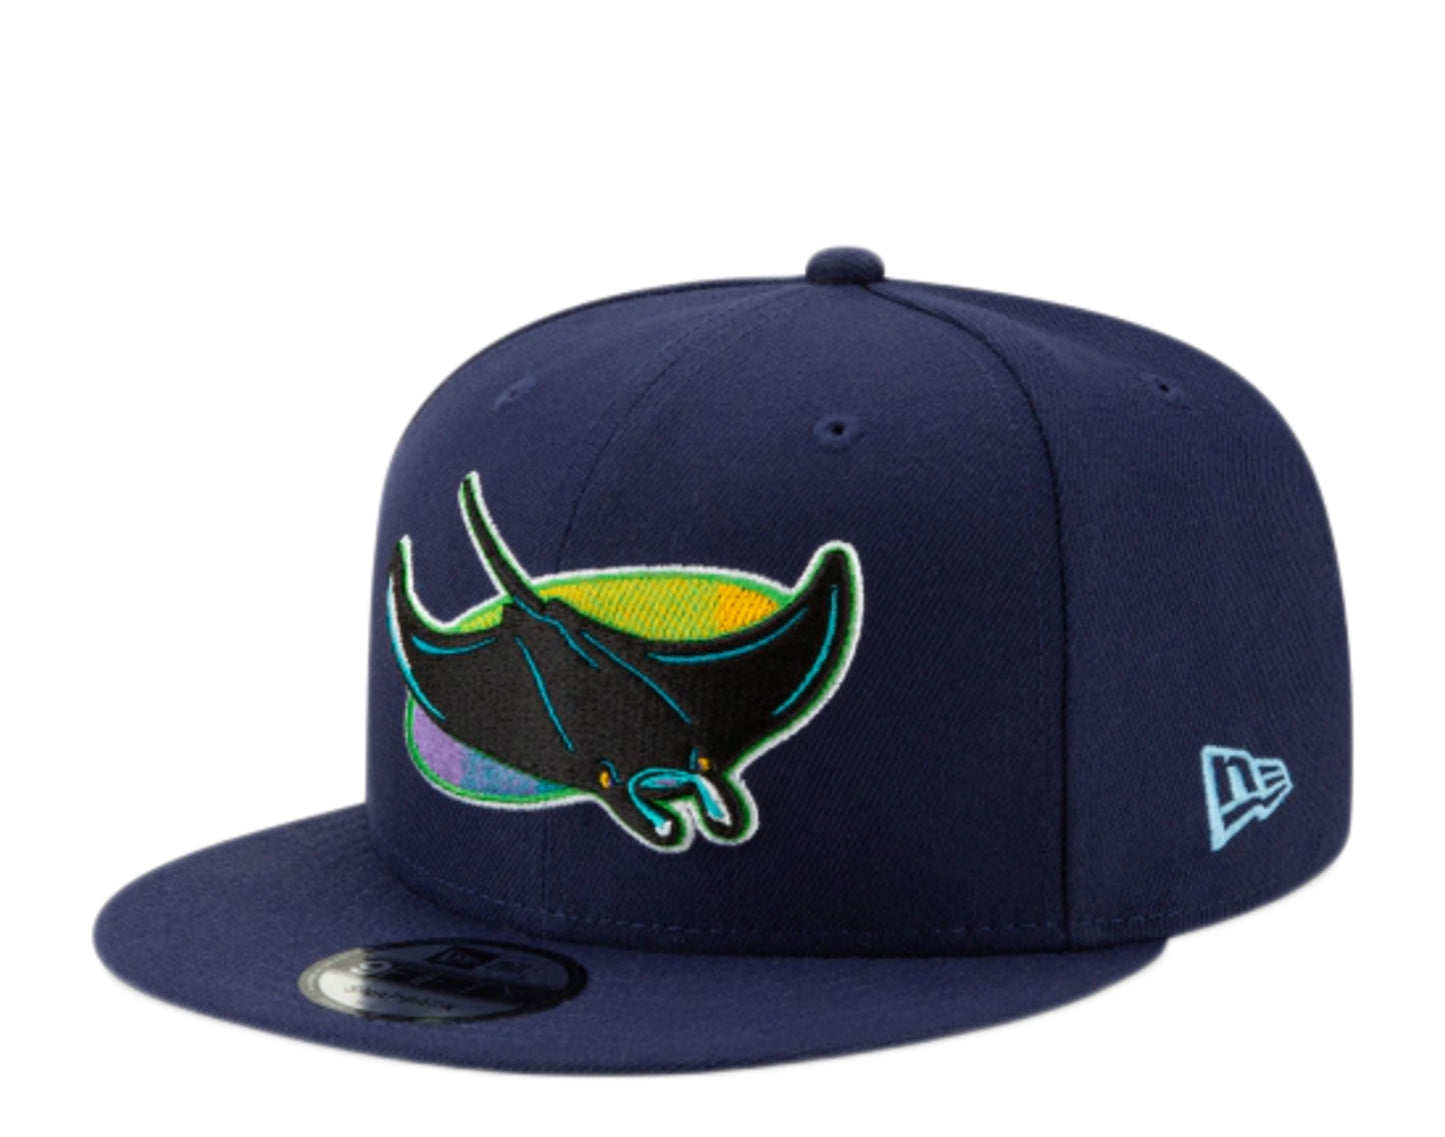 New Era 9Fifty MLB Tampa Bay Rays 1998 Cooperstown Basic Snapback Hat